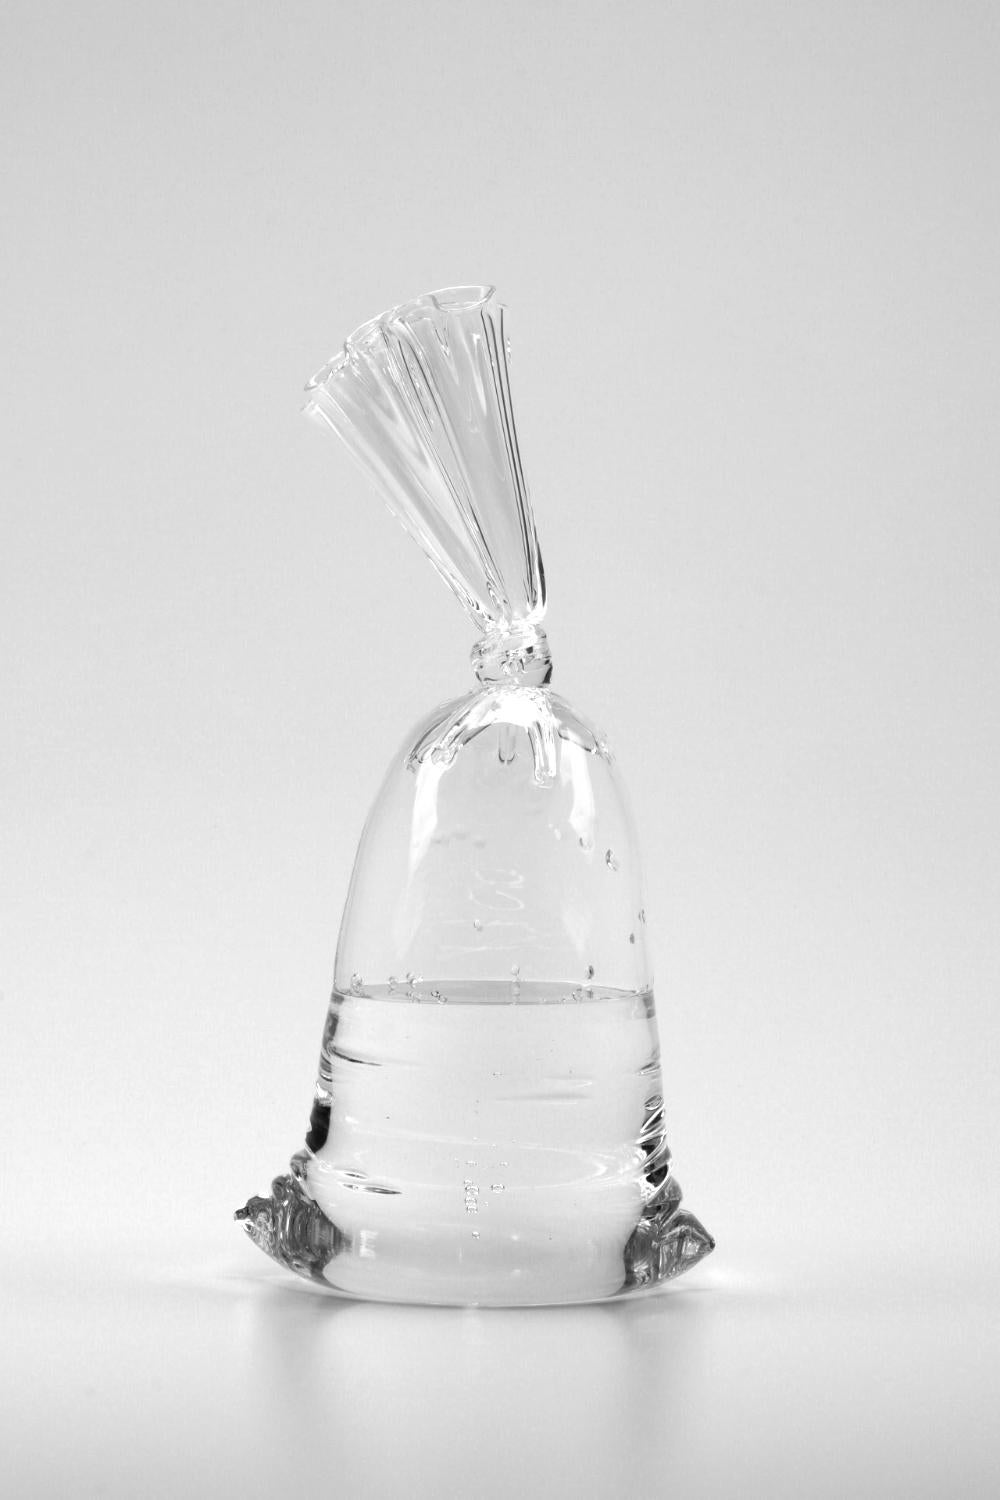 Hyperreal water bag glass sculpture - solid and hollow glass by Dylan Martinez.  

Martinez's hyperreal sculptures are hot sculpted glass that is hand molded entirely by the artist. 

The piece is signed and numbered on the base by the artist.